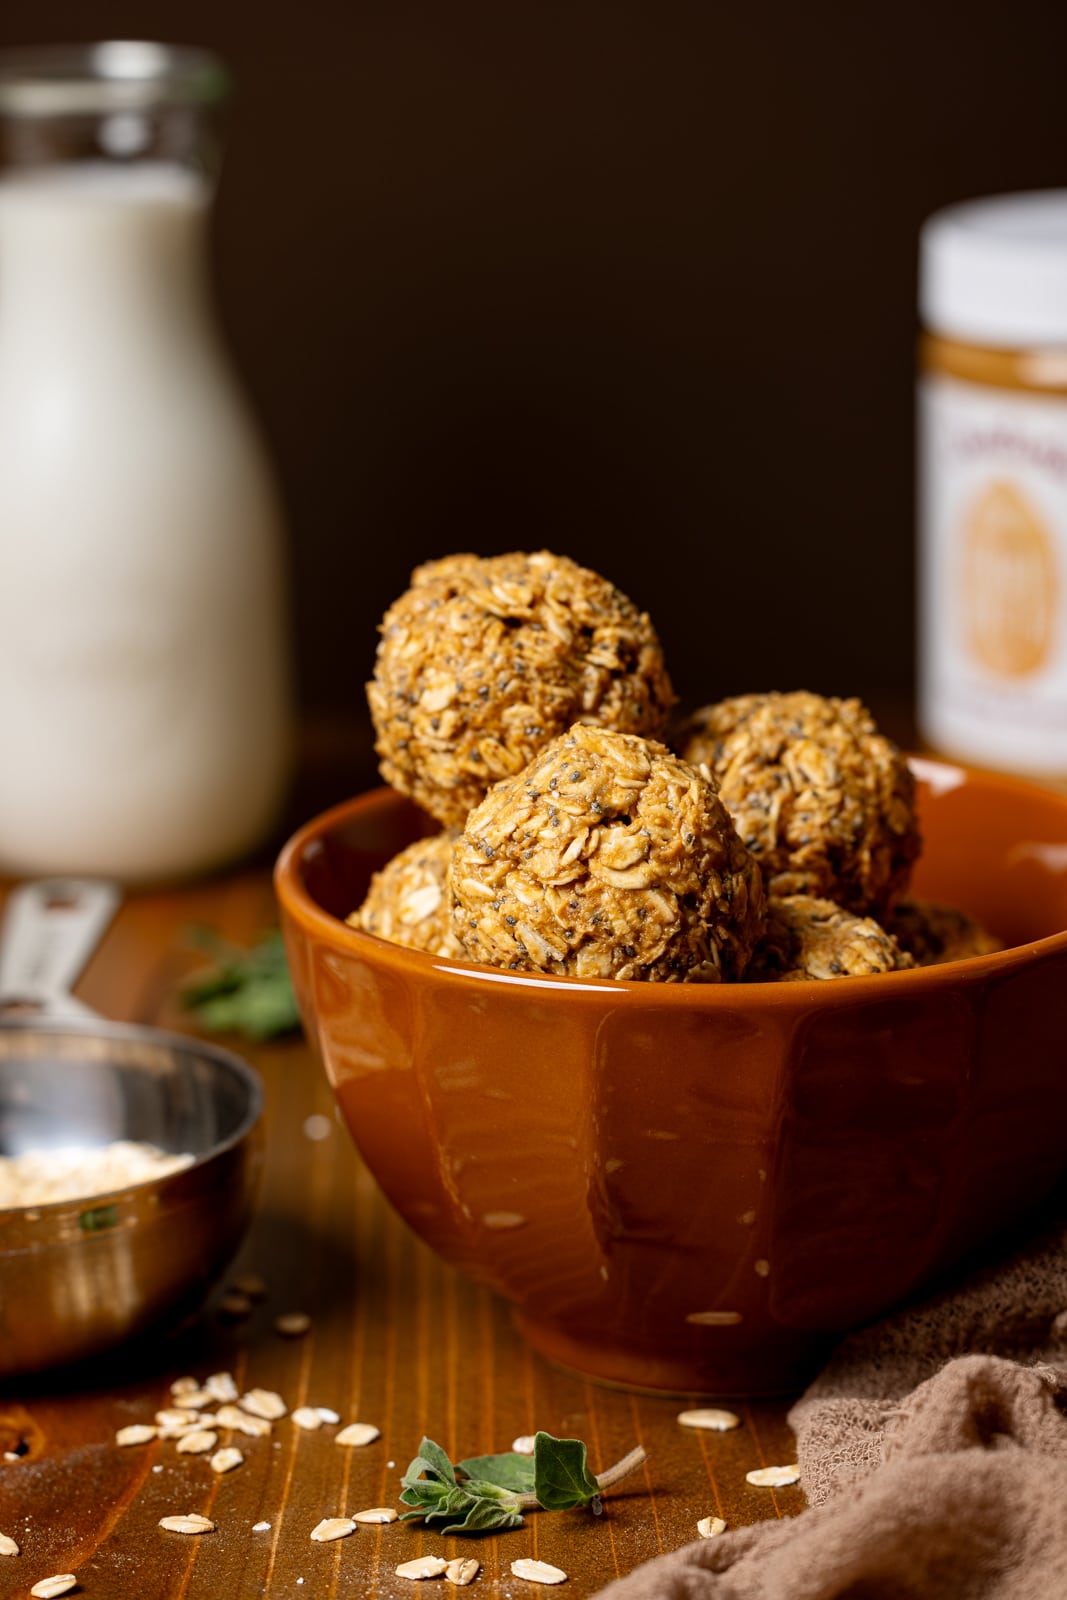 Peanut butter balls in a brown bowl with a measuring cup with oats, glass of milk, and jar of peanut butter.